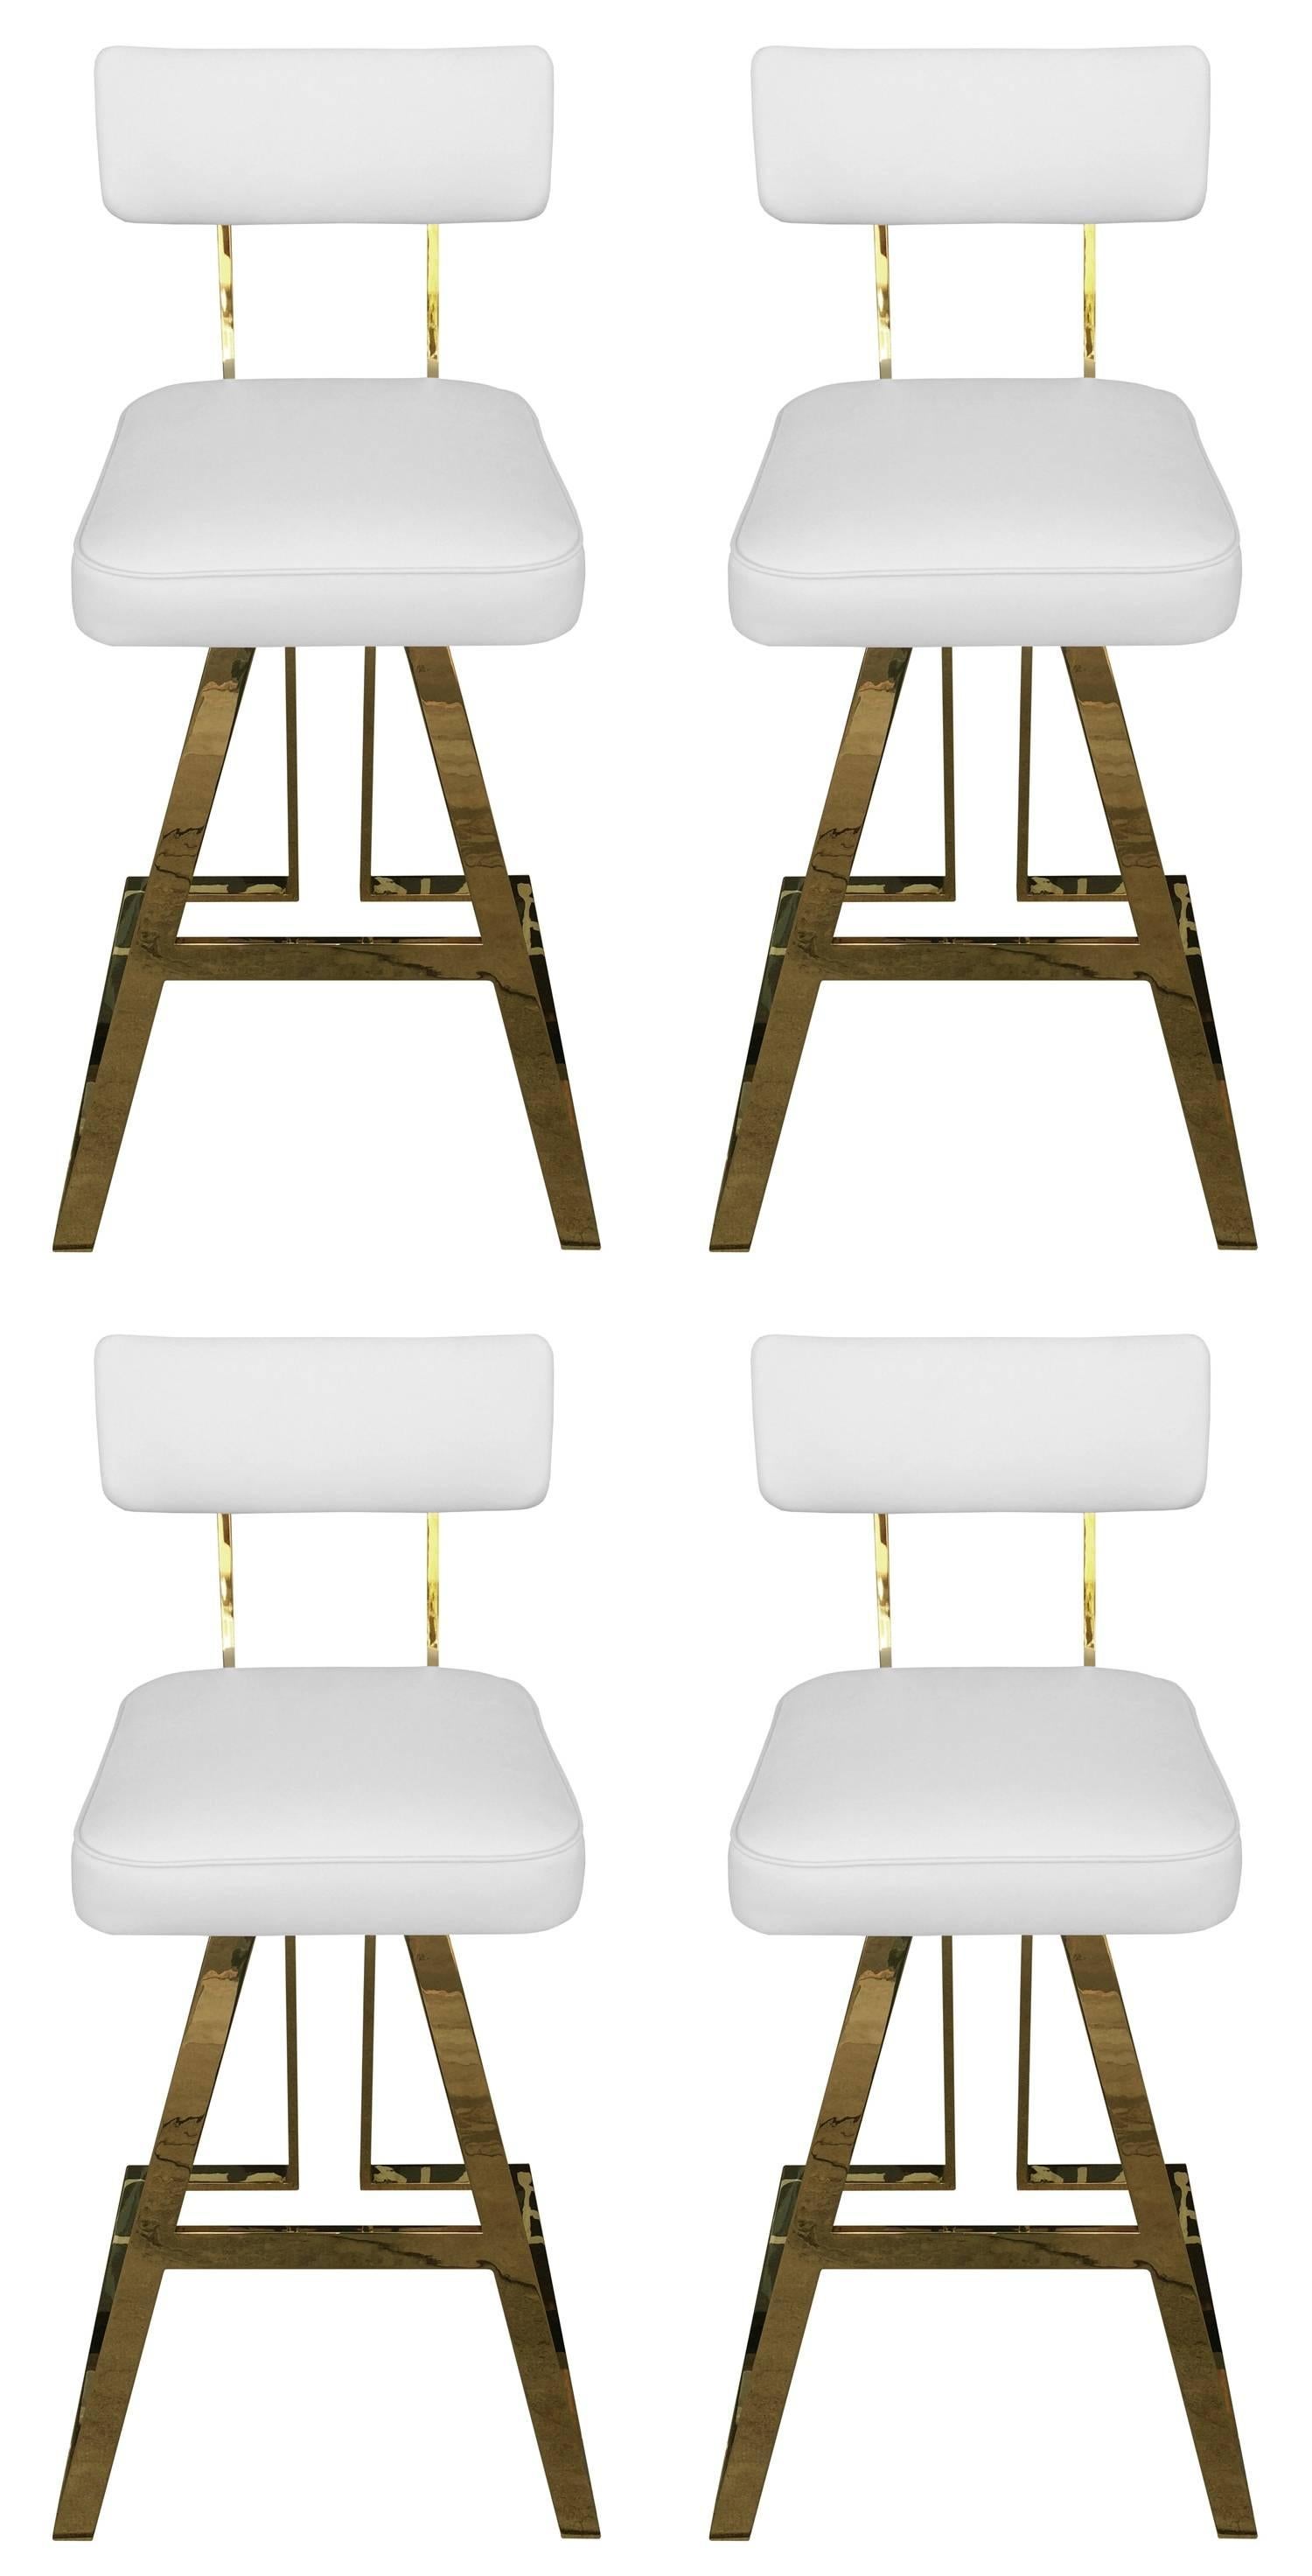 Stunning and rare sate of four bar-stools designed by Charles Hollis Jones in the 1960s.

The bars-stools are executed in brass and they have beautiful architectural lines, the seats swivel 360 degrees and they are very comfortable.

The stools